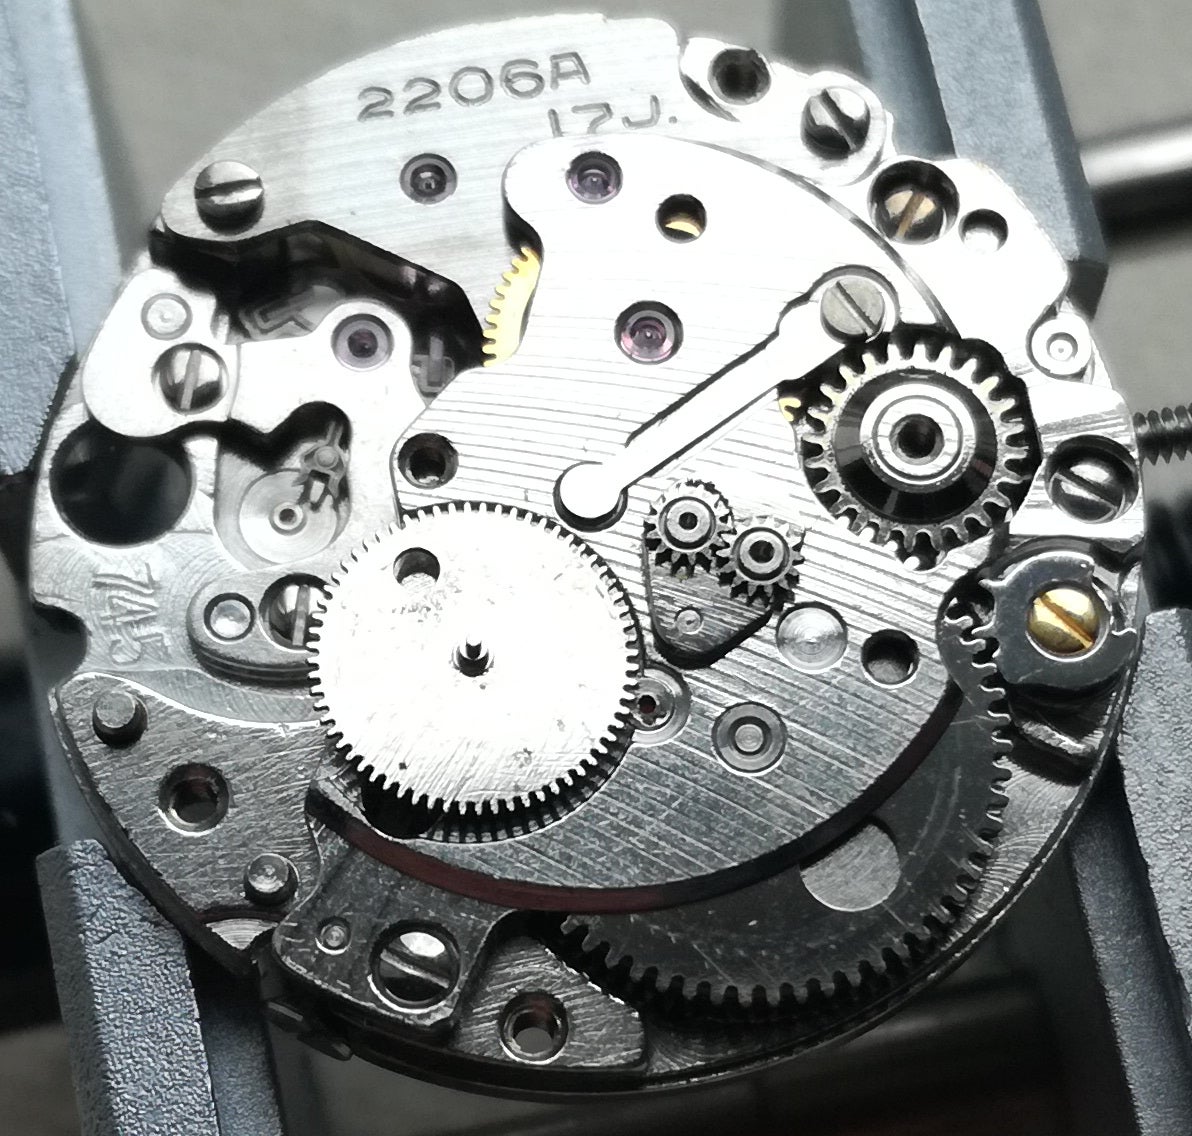 Seiko 2206 repair issues | The Watch Site